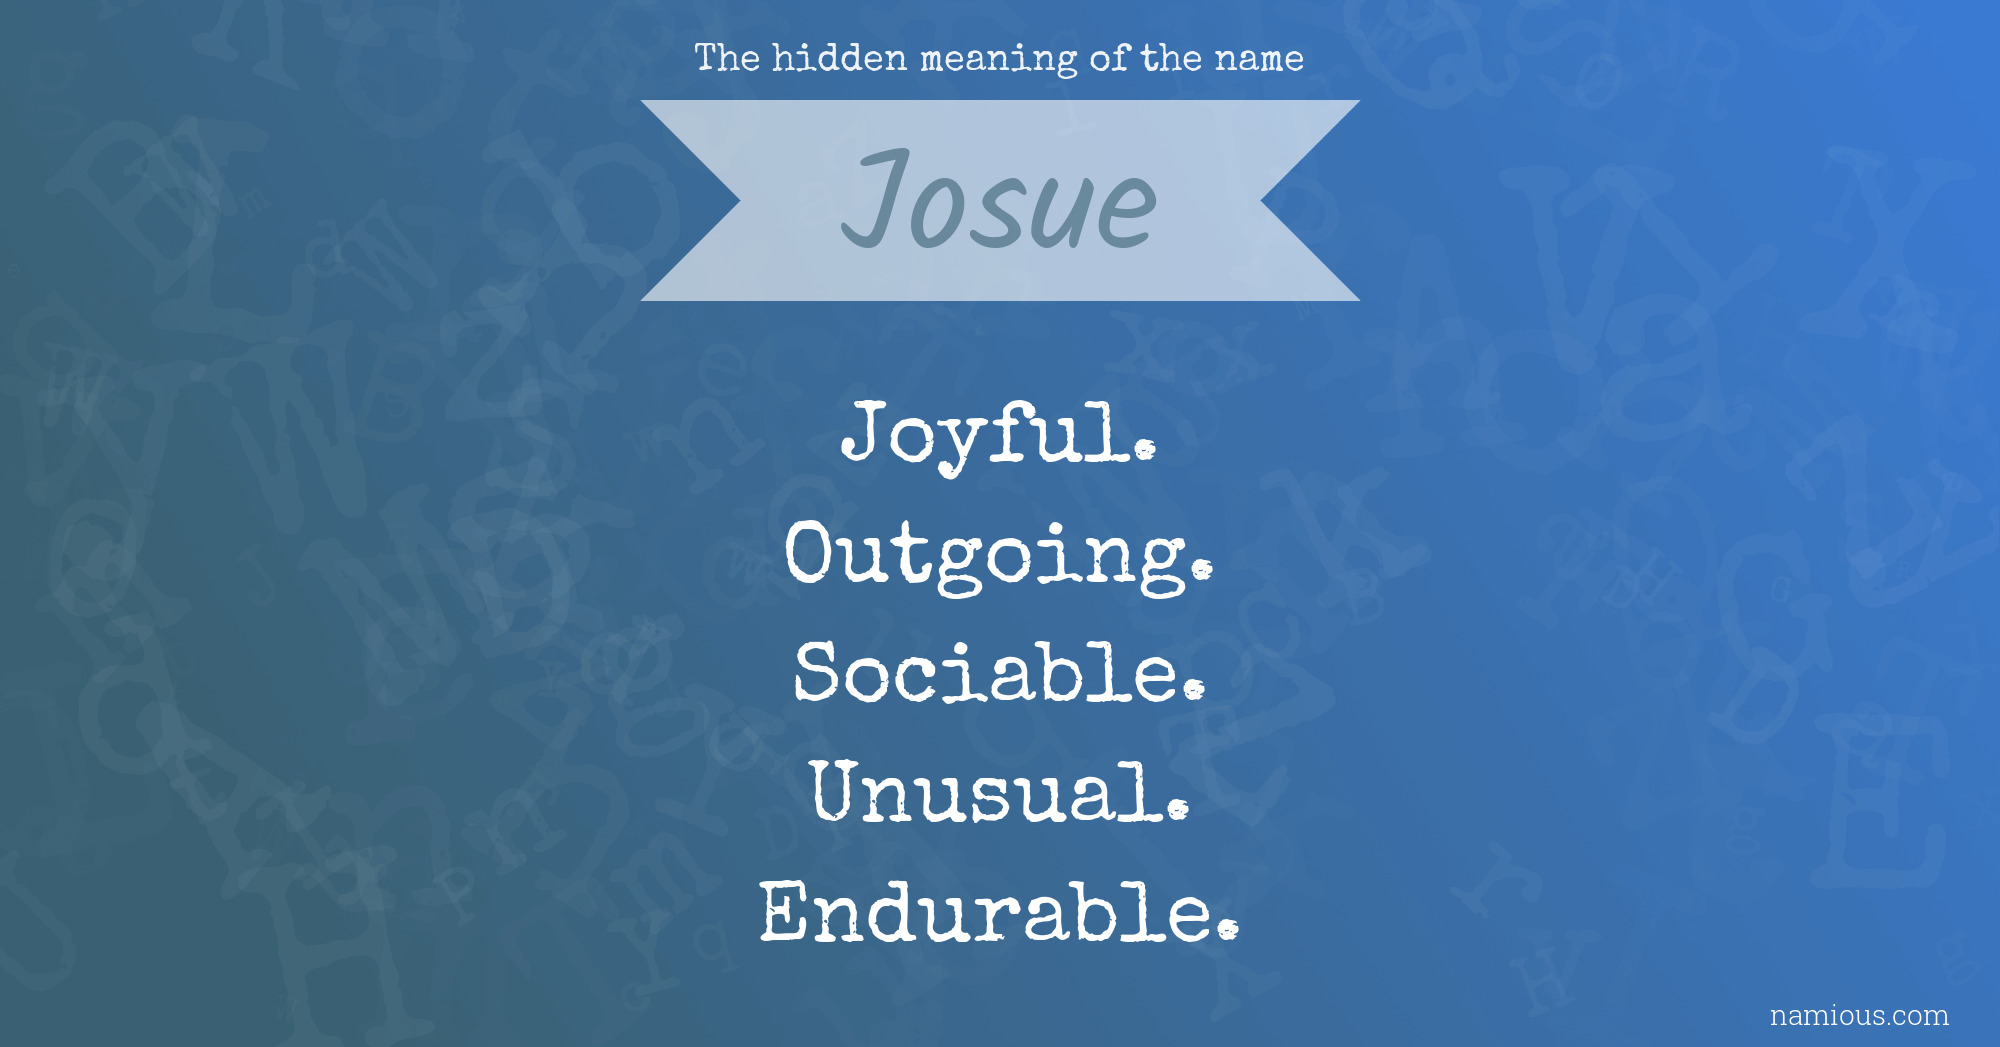 The hidden meaning of the name Josue